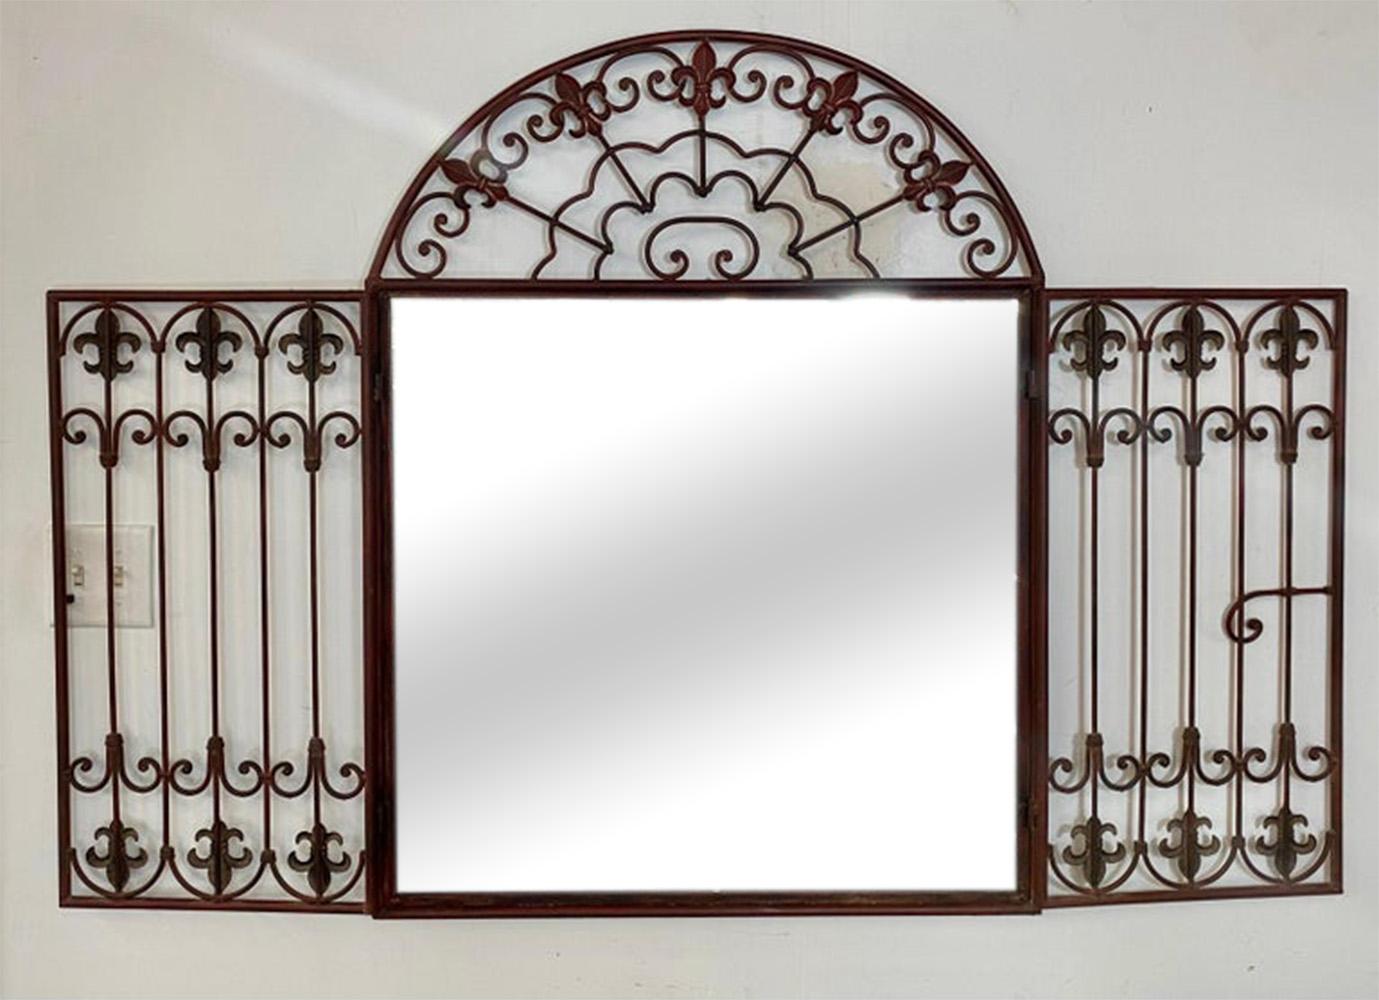 A charming French Louis XVI style wrought iron mirror in a Mediterranean design fashion. The wrought iron frame is finely crafted showing scrolls and fleur de lis motifs and having two doors opening to reveal the mirror inside.  The color of the